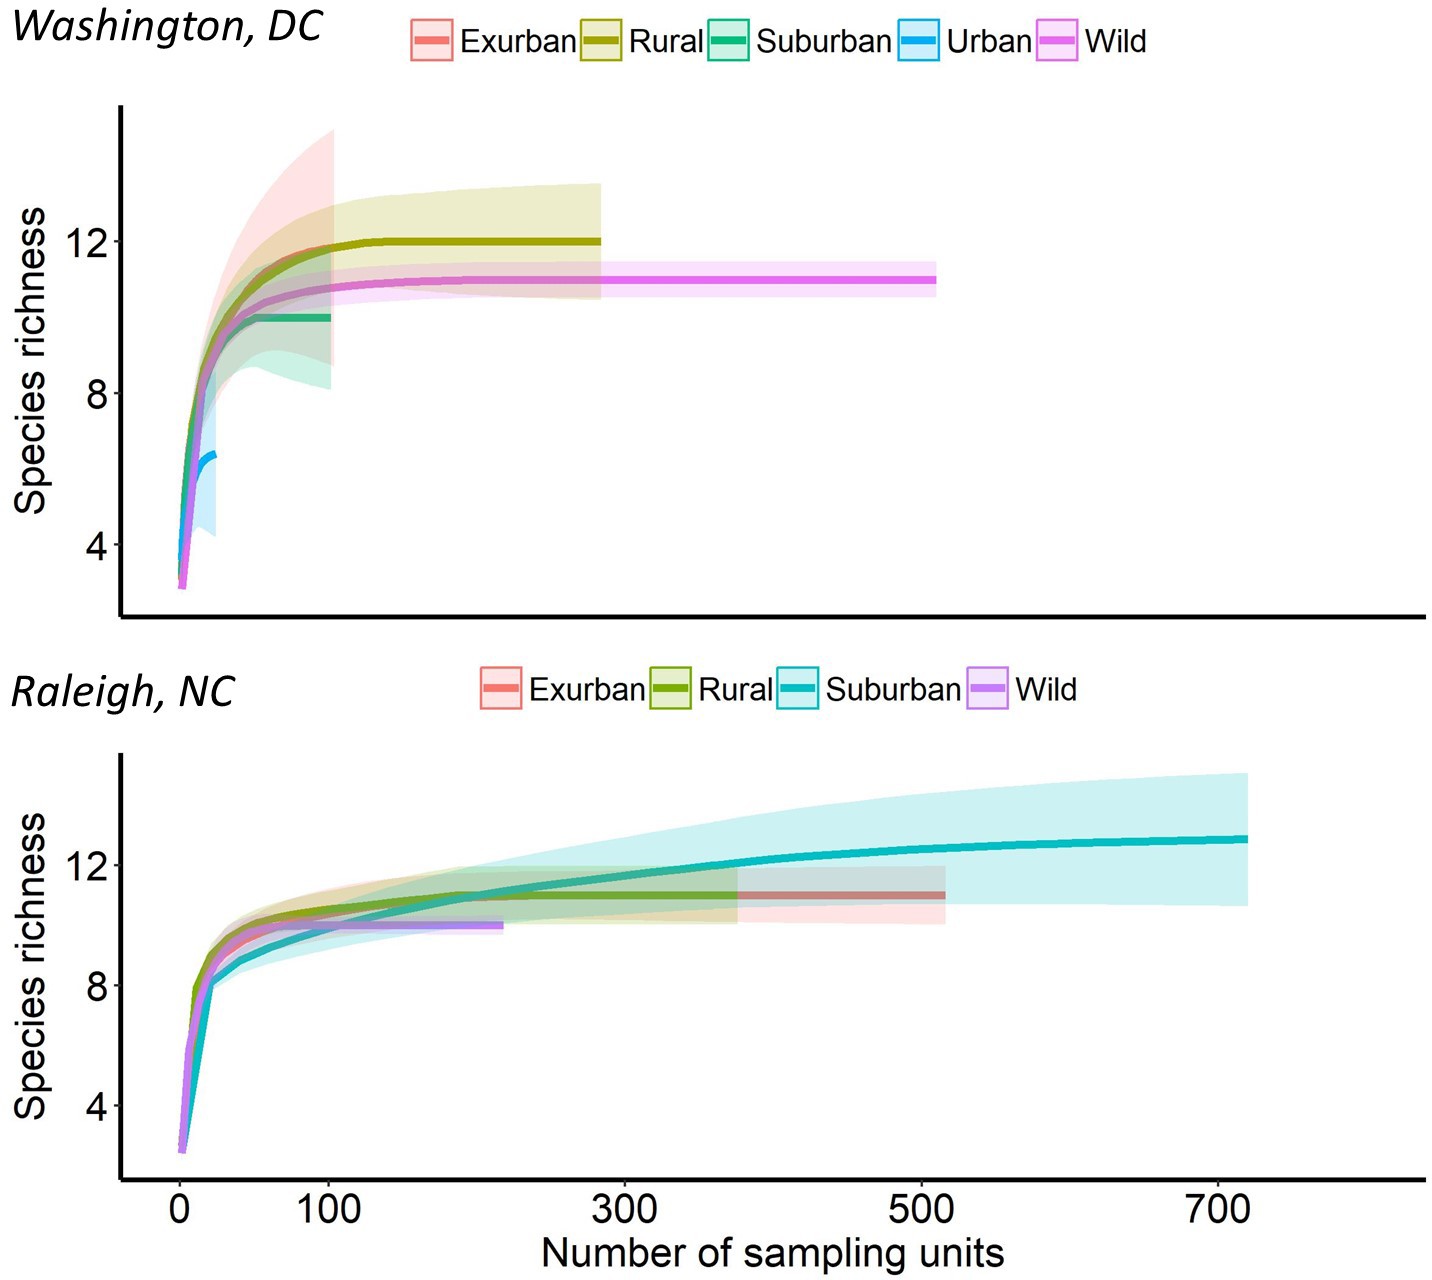 Mammal Communities Are Larger And More Diverse In Moderately - rarefaction curves estimating species richness in five development levels urban suburban exurban rural wild in two cities washington dc and raleigh